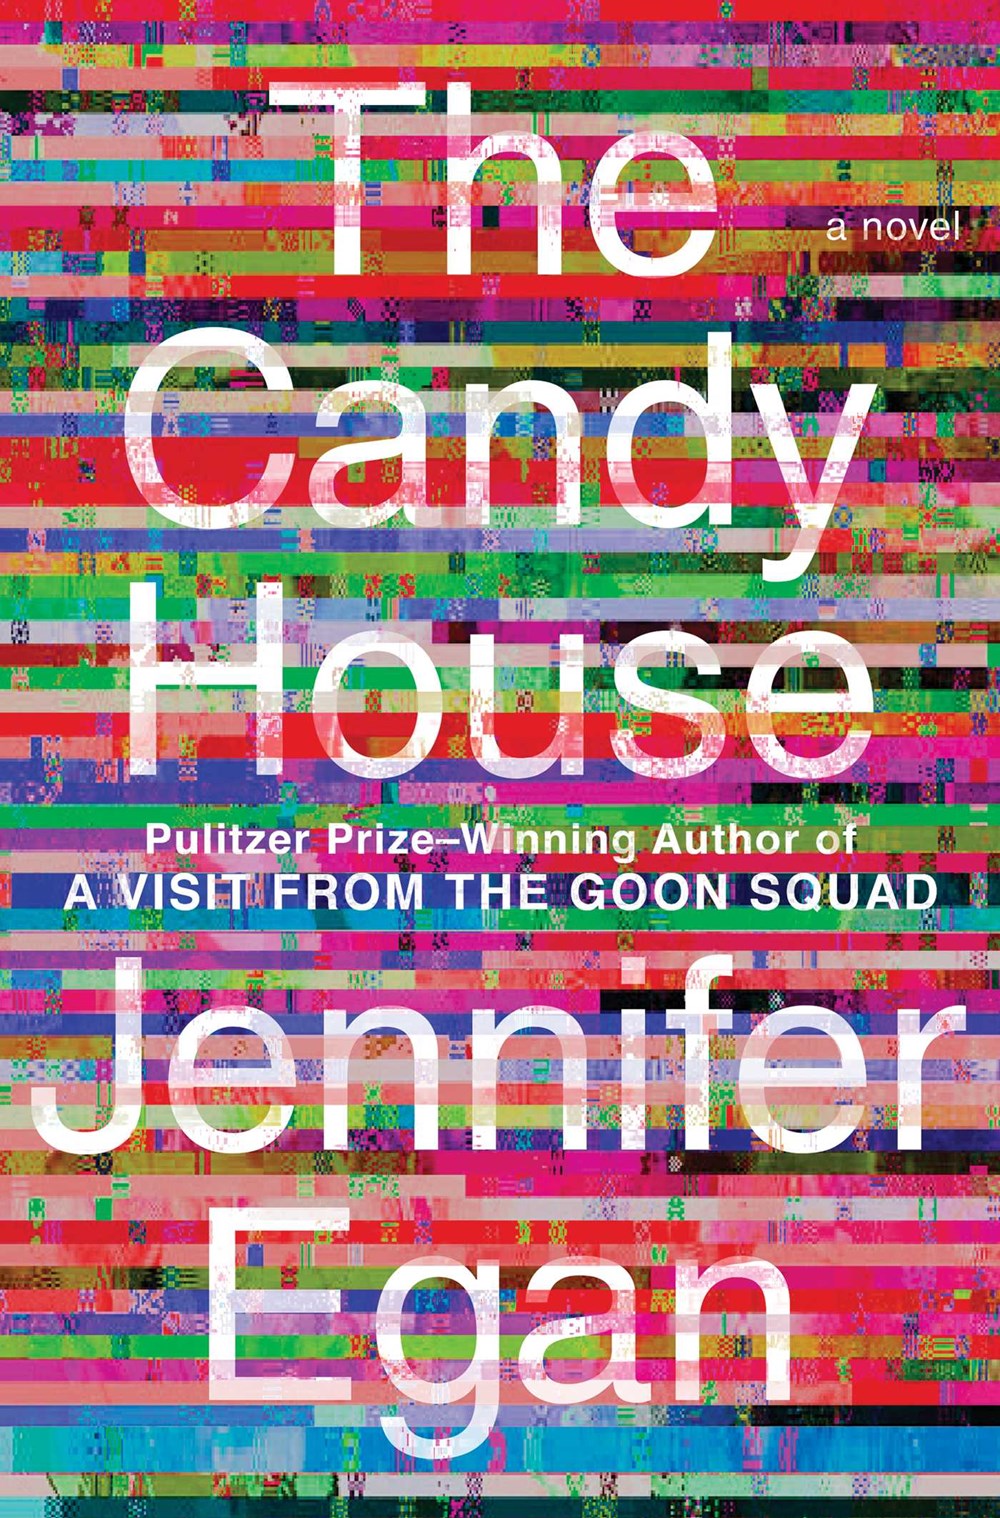 The Candy House cover image